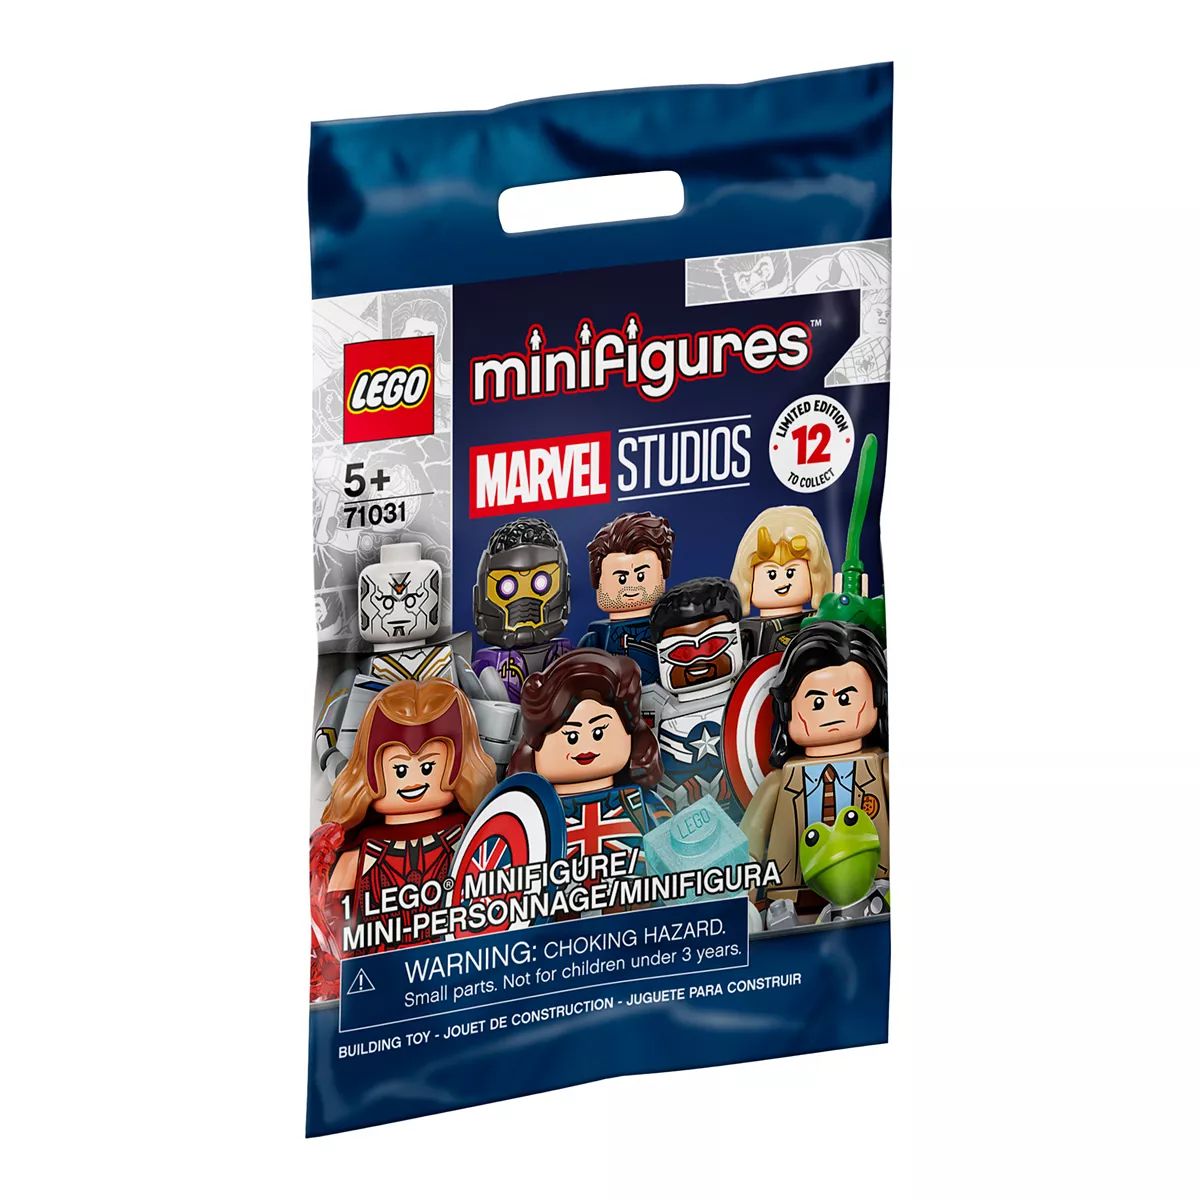 LEGO Minifigures Marvel Studios 71031 Building Kit (1 of 12 to Collect) | Kohl's